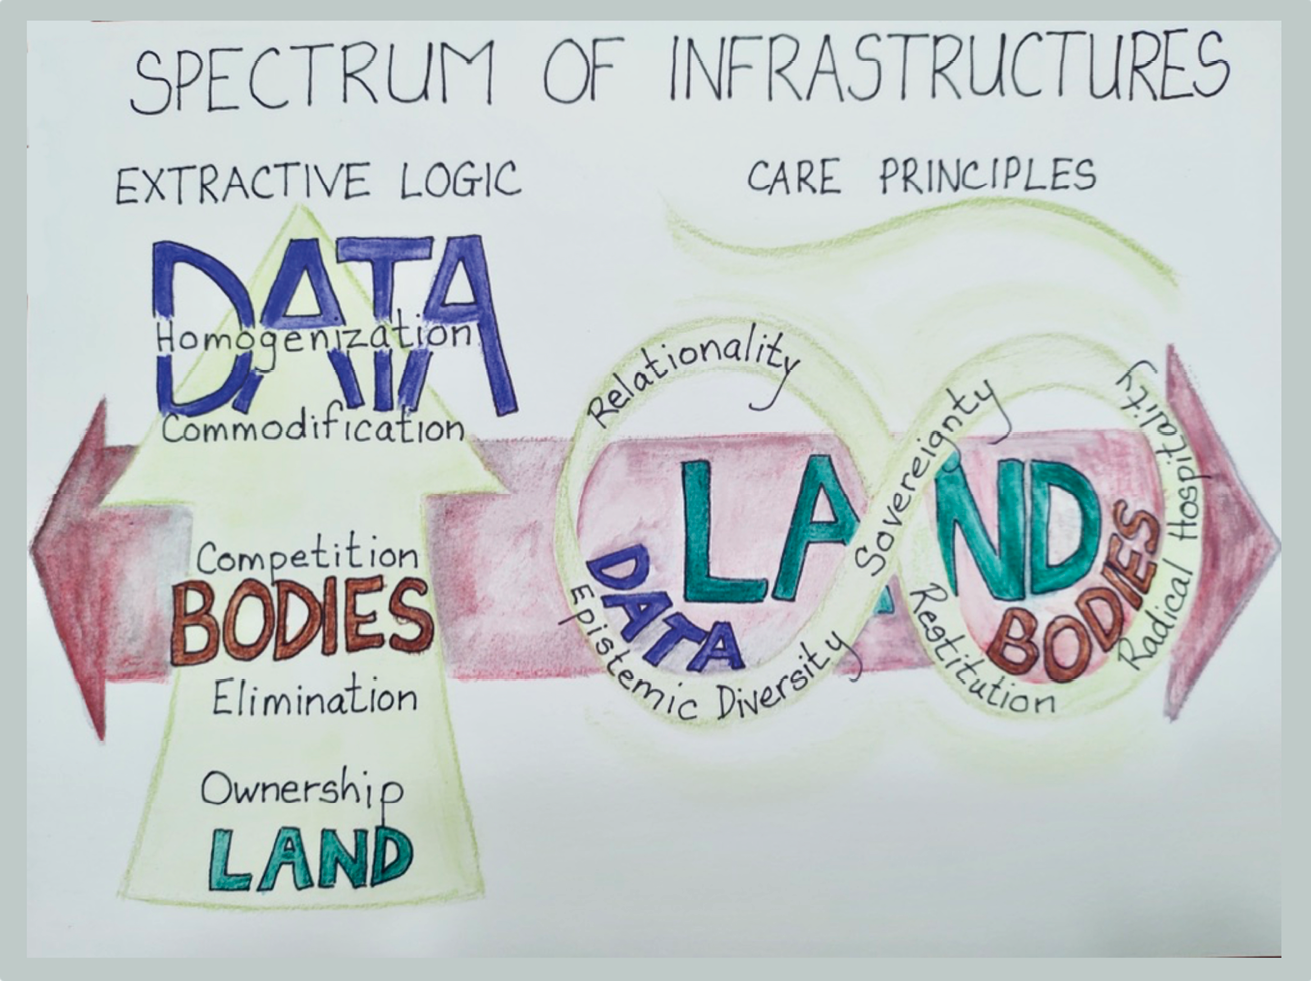 Coloured explanatory drawing titled Spectrum of Infrastructures with two components titled Extractive Logic and Care Principles. The first component is depicted through an up arrow with its base marked with texts reading ìLand,î ìOwnership,î ìElimination,î ìBodies,î and ìCompetition,î and its upper section marked with texts reading ìCommodification,î ìHomogenization,î and ìDataî. The second component is depicted through a double horizontal arrow pointing two opposite directions, marked with text reading ìLandî. This arrow intersects with the first arrow at its left end, and has an infinity symbol with texts reading ìData,î ìBodies,î ìEpistemic Diversity,î ìRelationality,î ìSovereignty,î ìRestitution,î and ìRadical Hospitalityî at its right end.